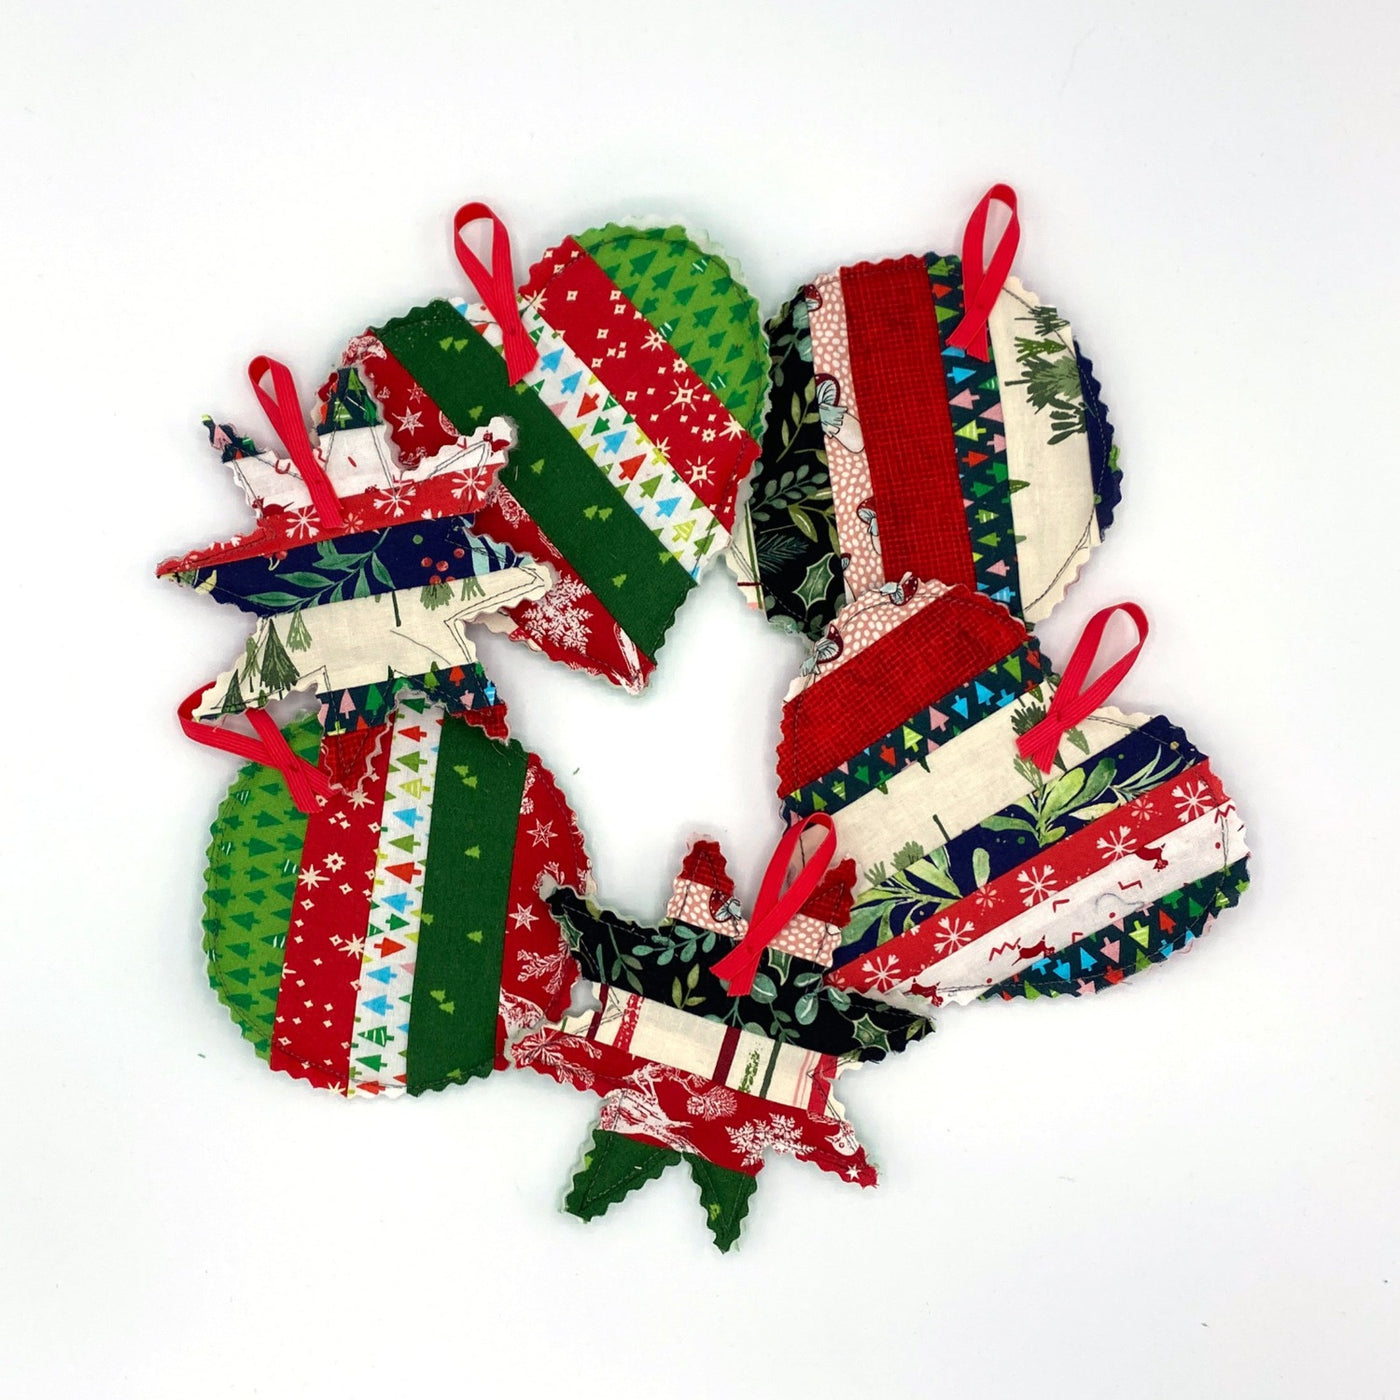 Strippy Christmas Ornaments - Free Downloadable Sewing Pattern